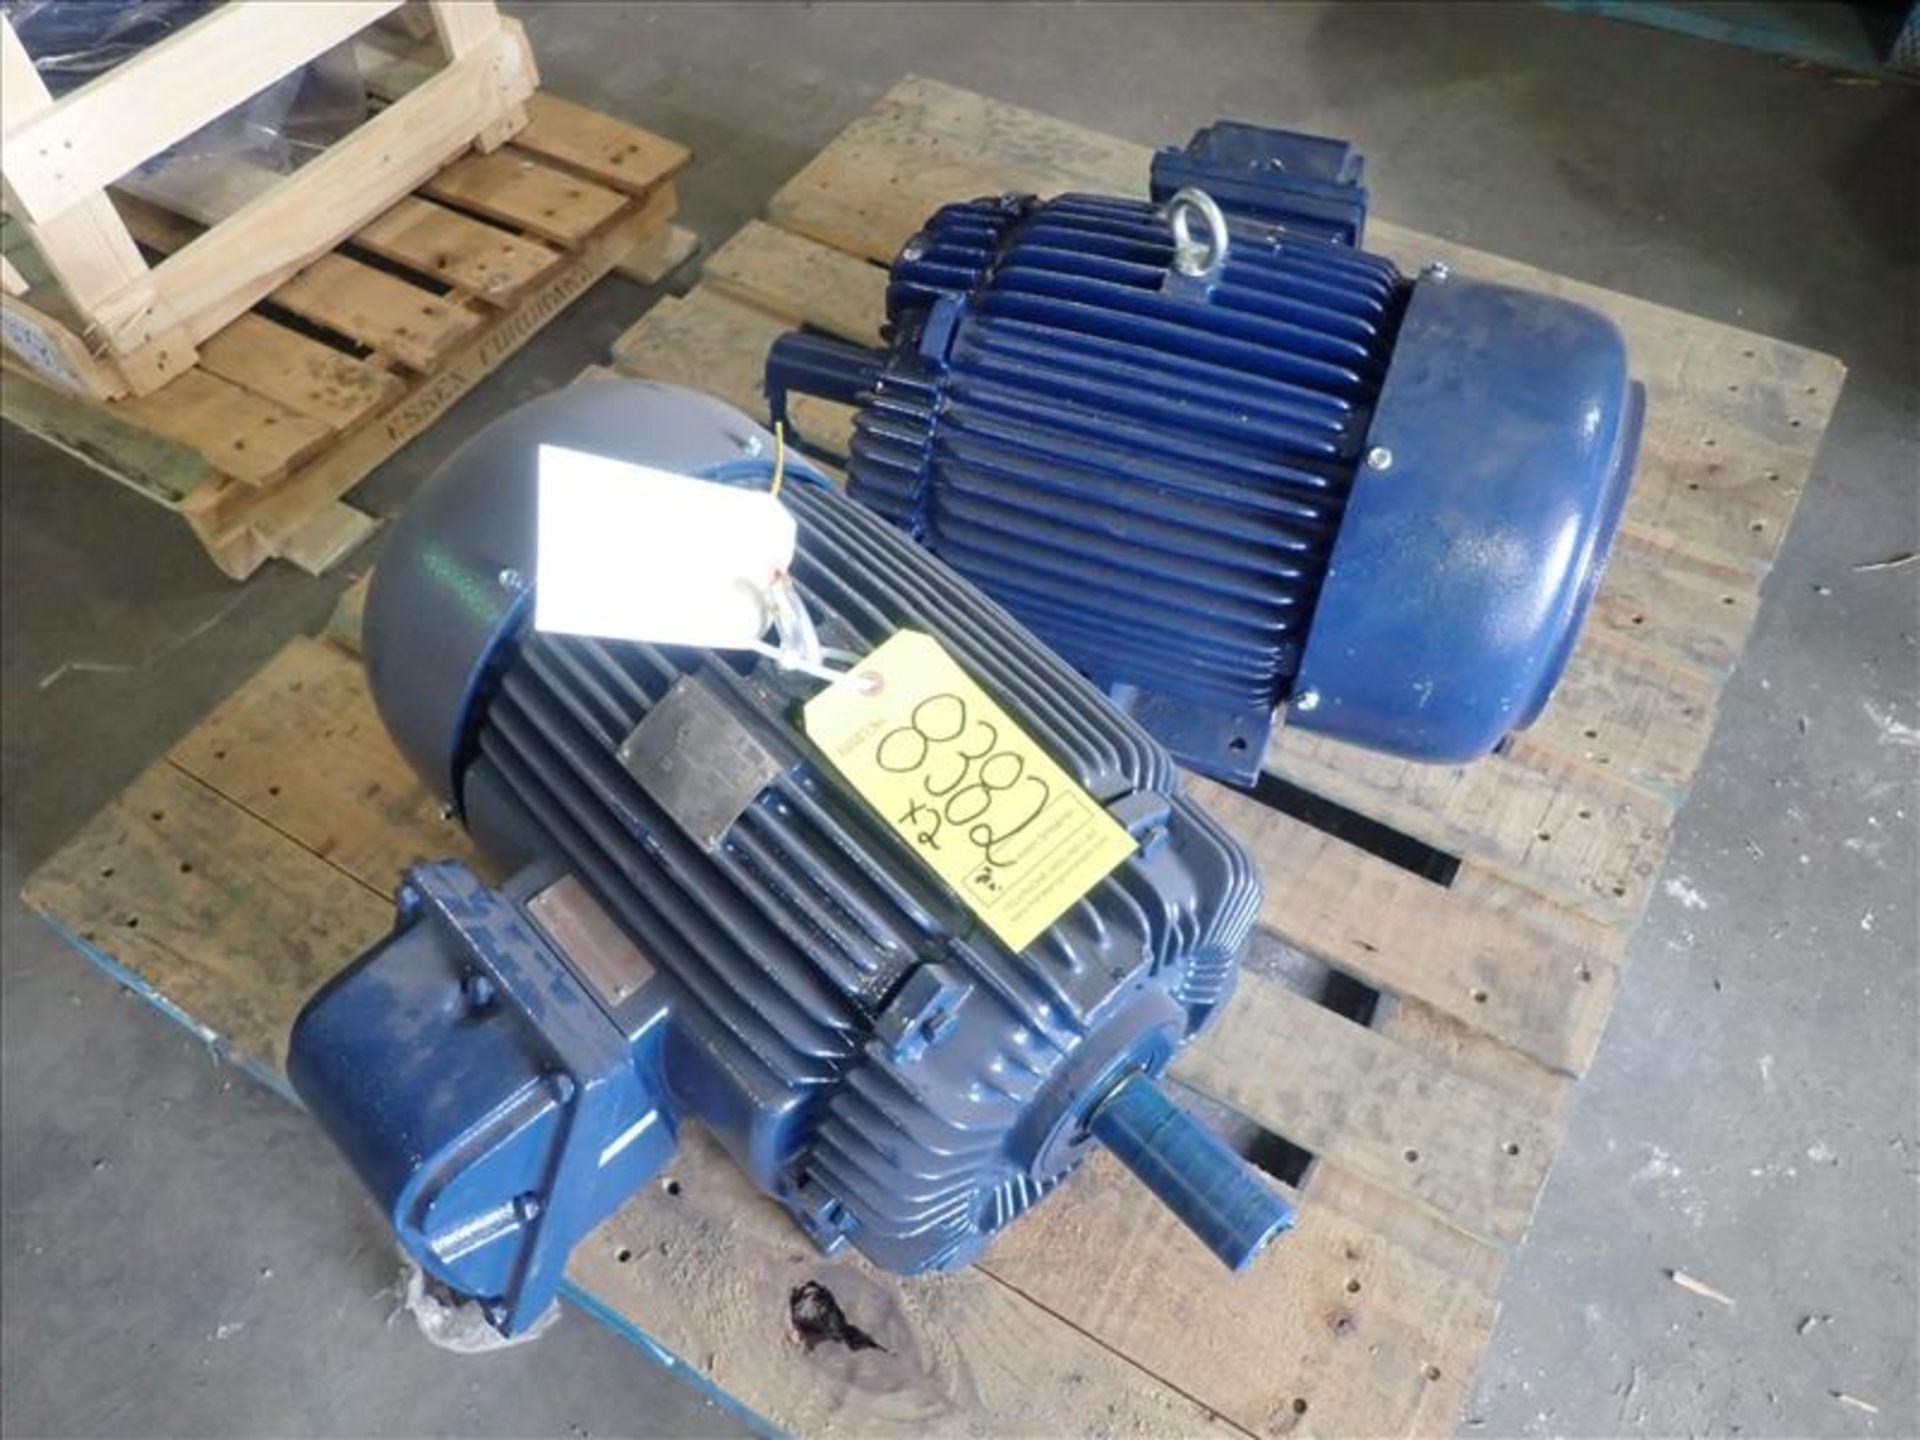 (2) Teco Westinghouse electric motors, 15/20 hp (Tag 8382 Loc WH Modified)